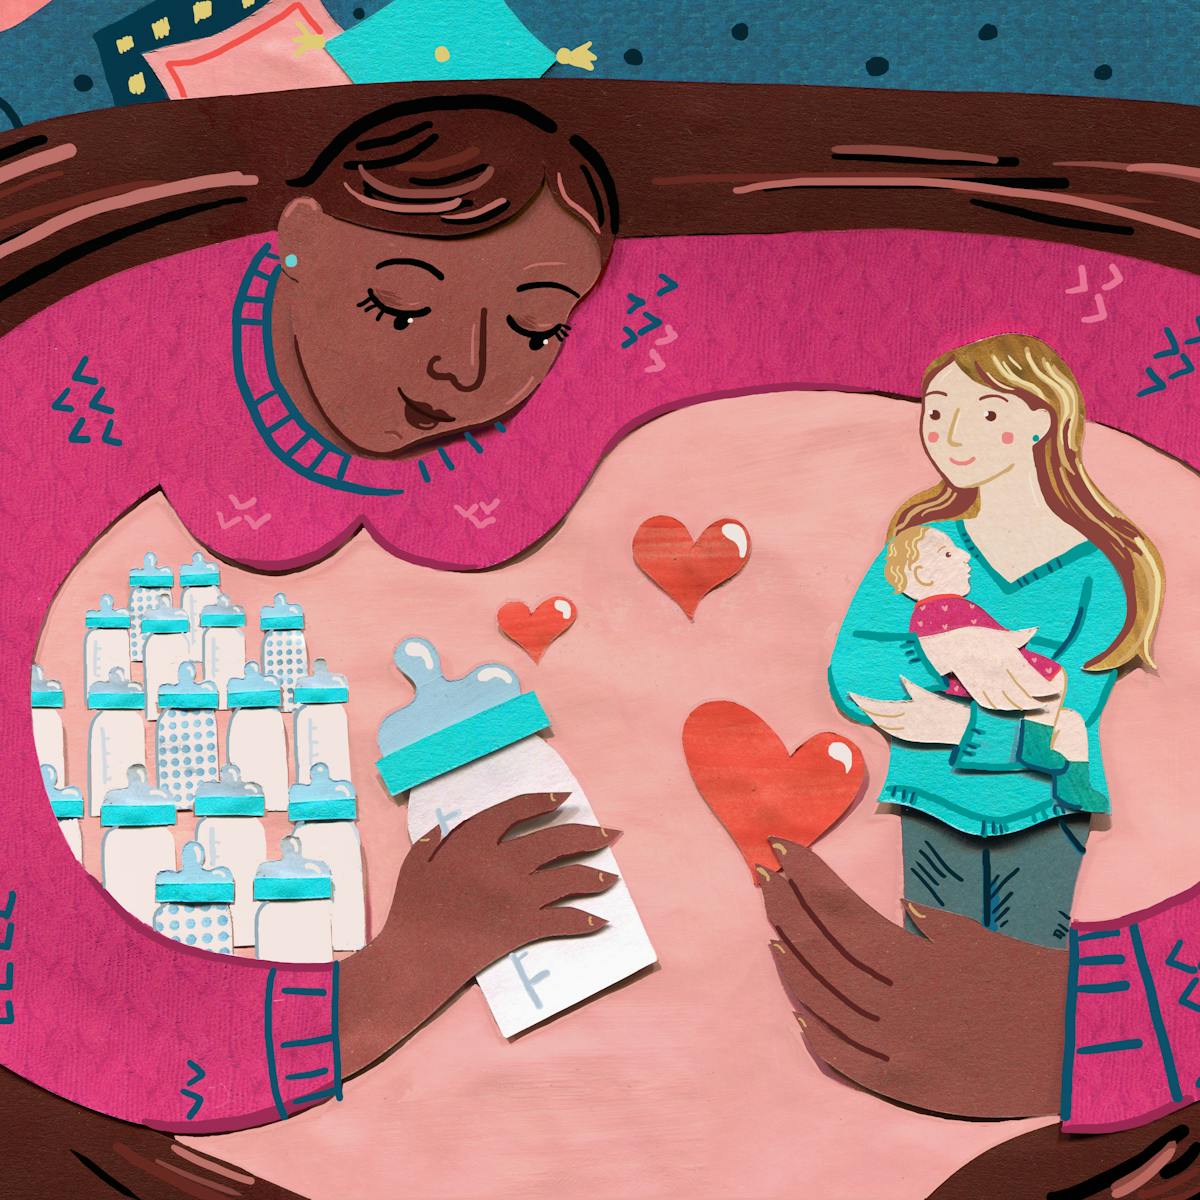 A mixed media illustration depicting a black mother with her arms outstretched. In one arm there are stacks of baby bottles full with milk, with one bottle being held in her hand. Wrapped in the other arm is a white mother carrying a child. Between the two arms there are small love hearts.